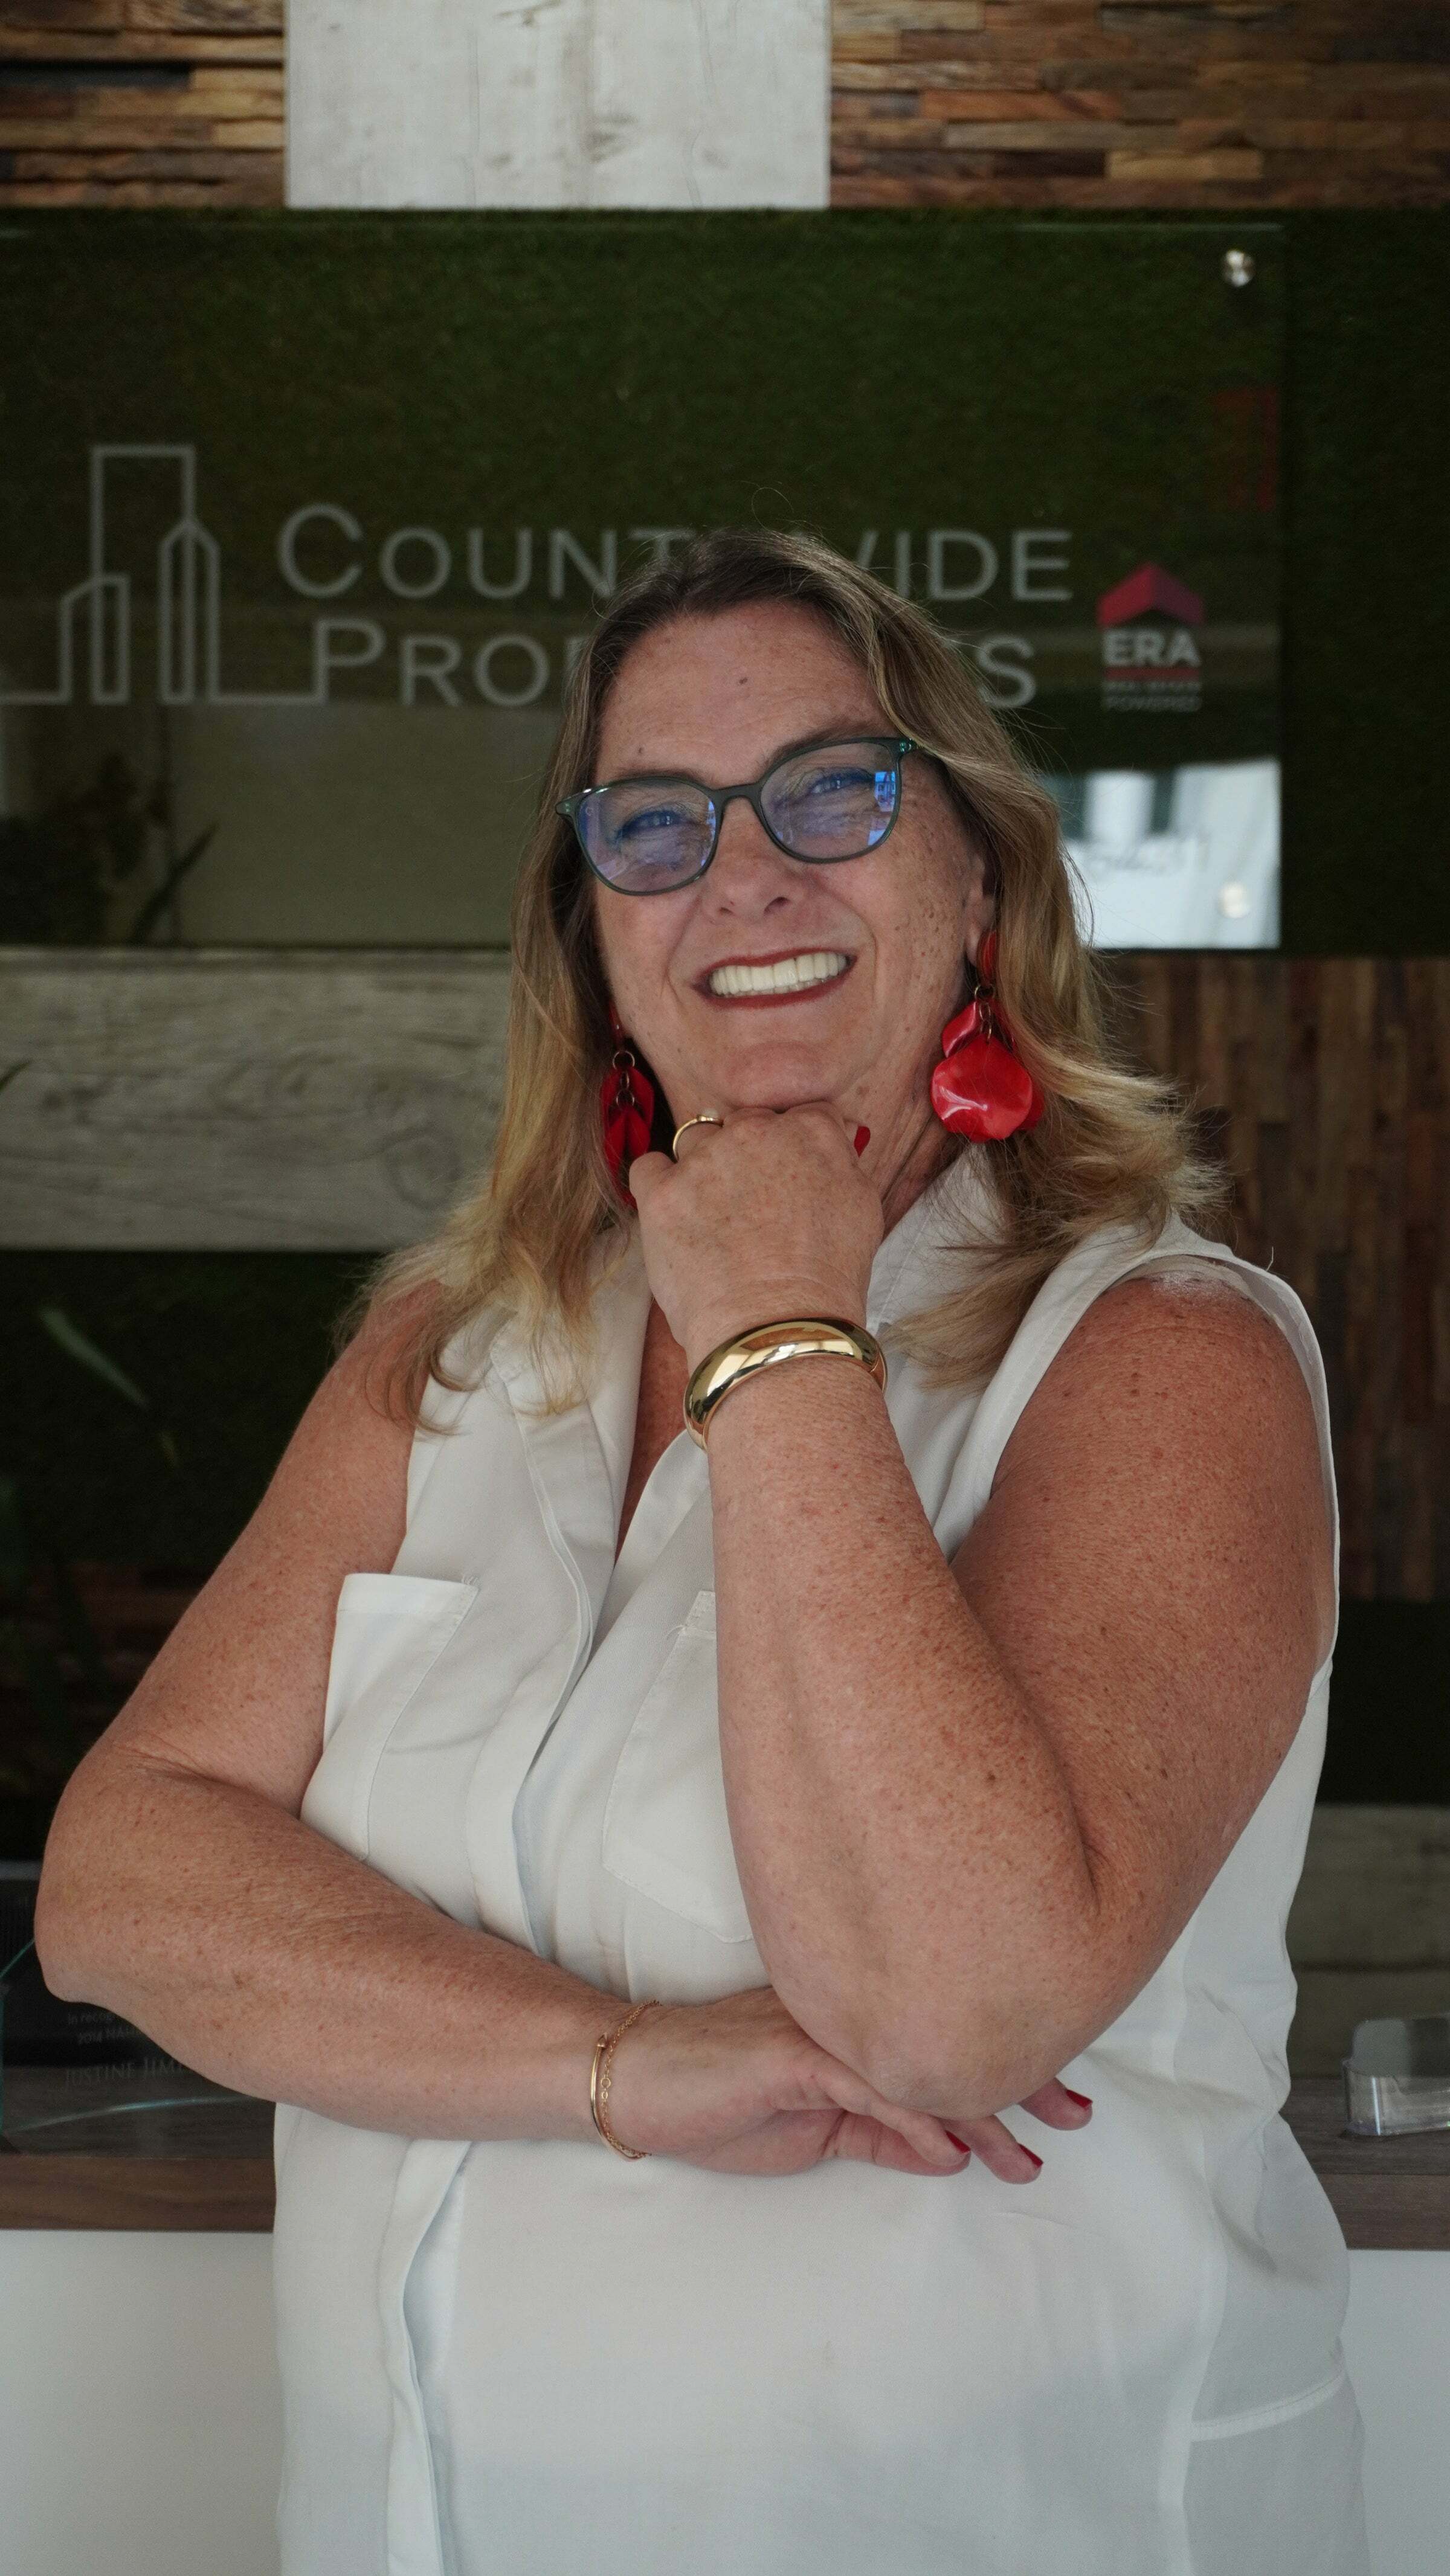 Mariann Moore, Real Estate Salesperson in Miami, Countywide Properties ERA Powered